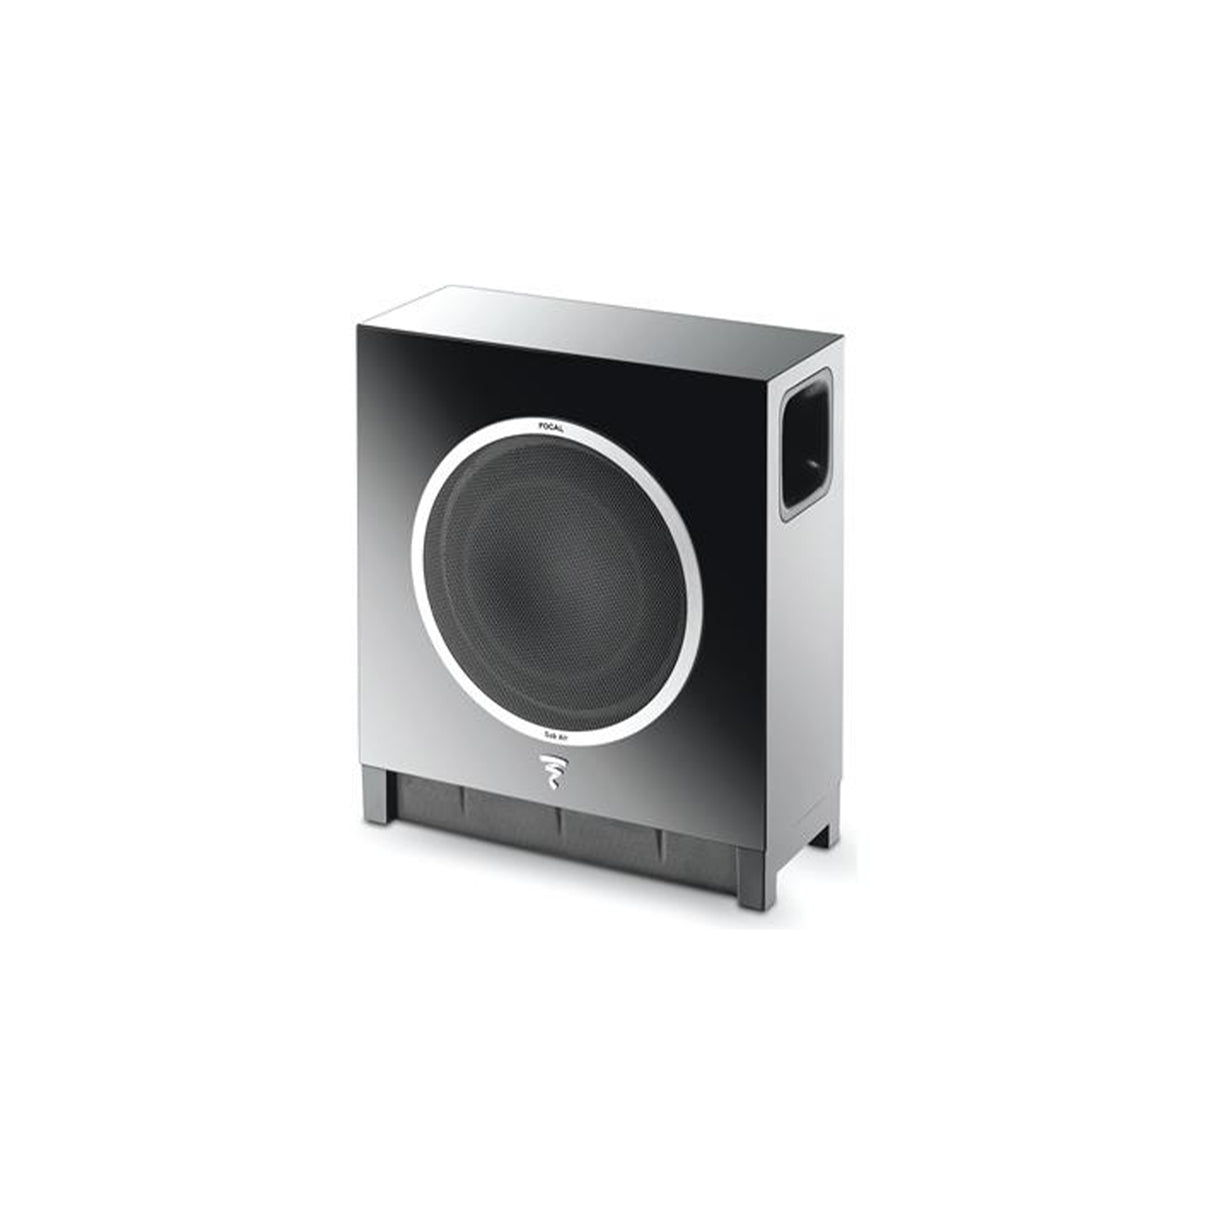 Focal Sub Air wall-mountable, wireless subwoofer (Black)